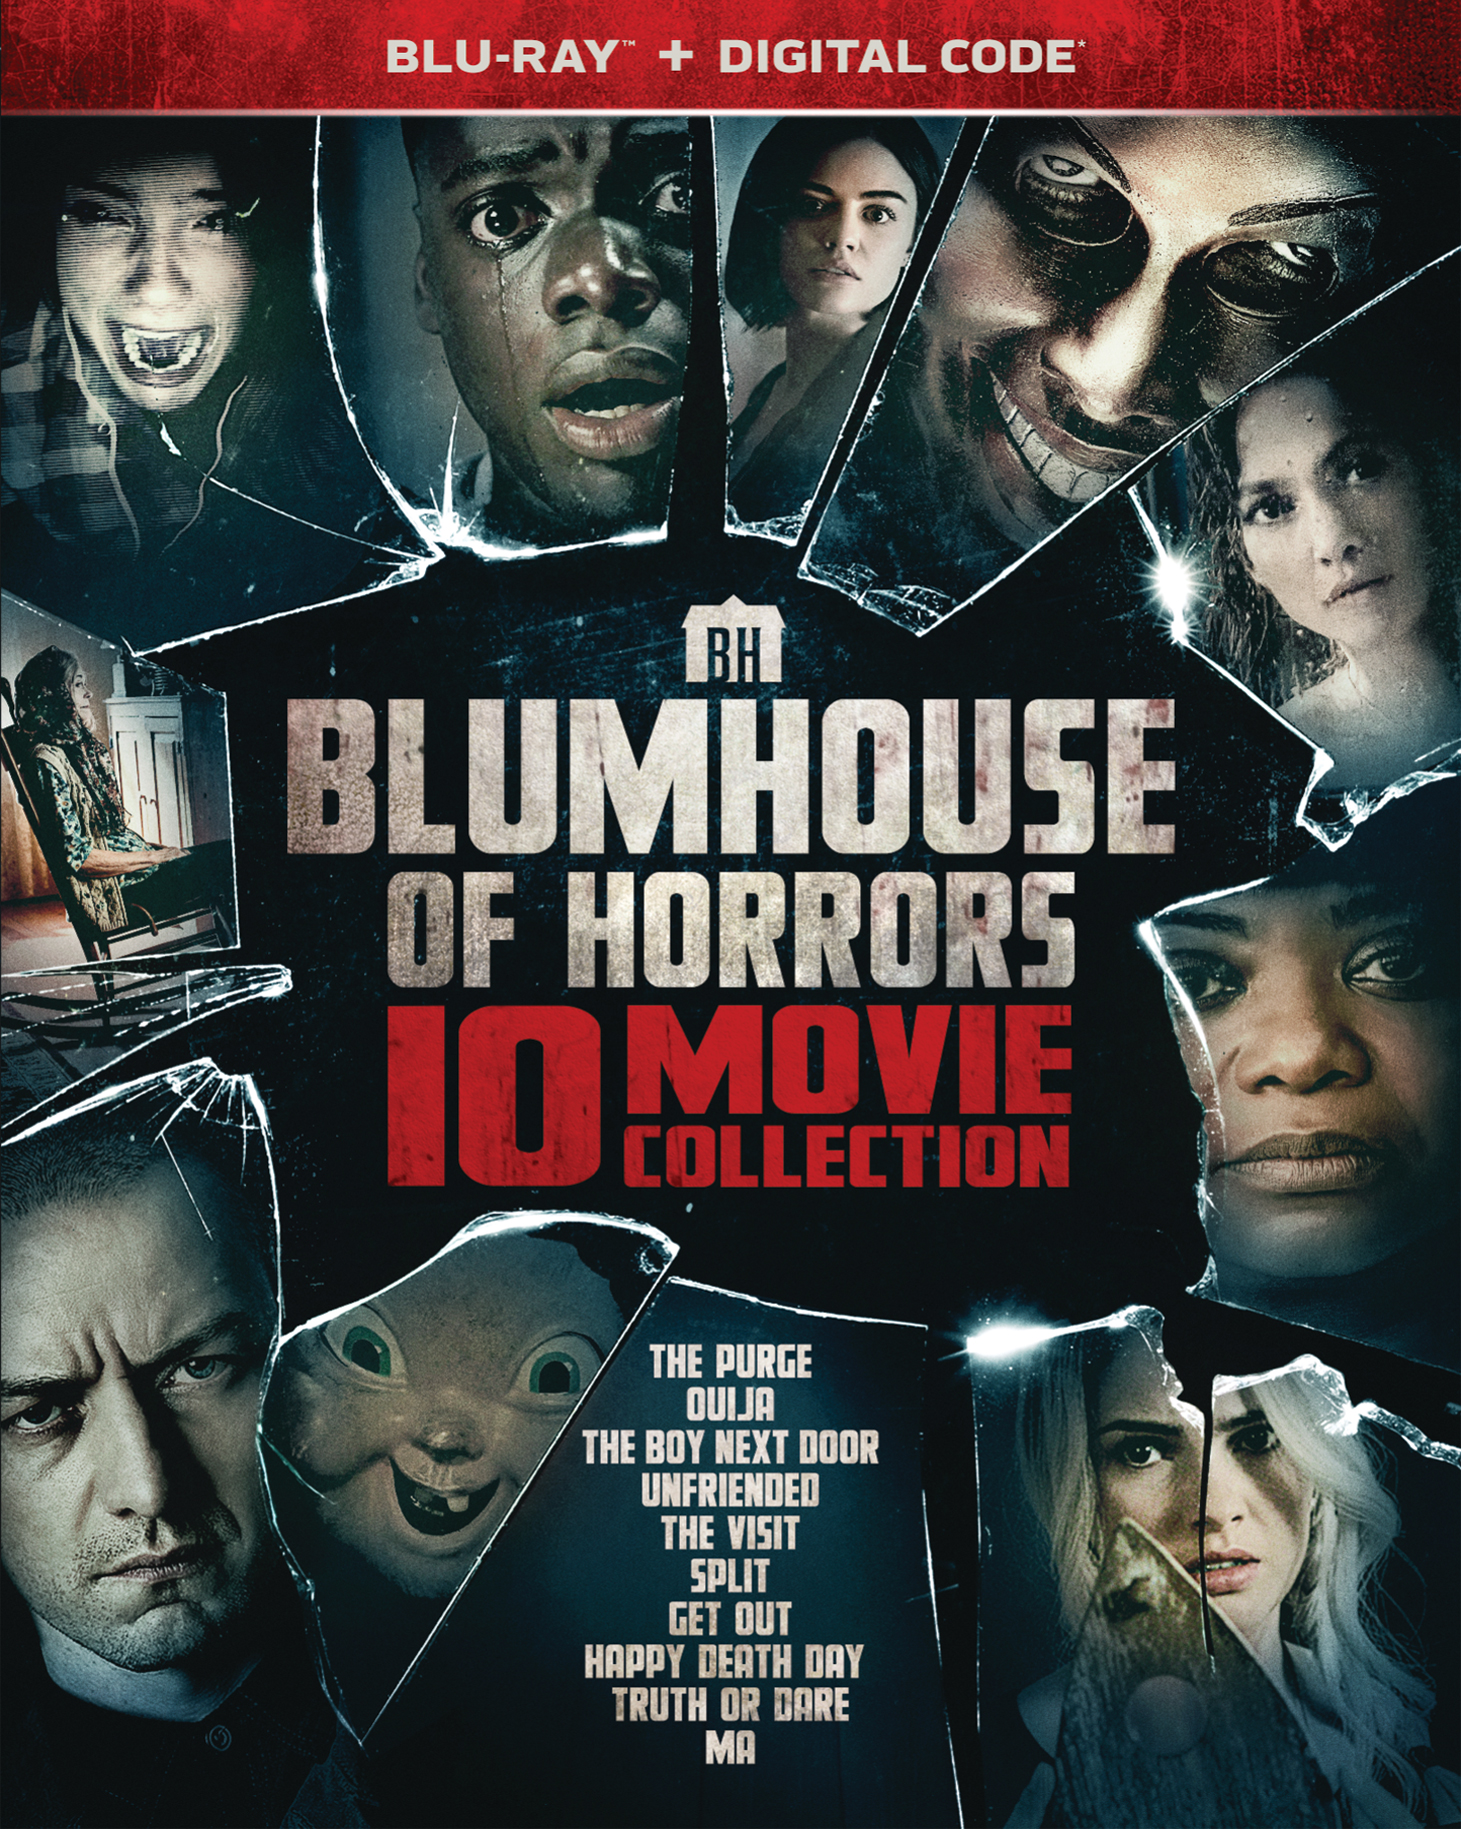 Blumhouse of Horrors: 10-Movie Collection [Blu-ray]